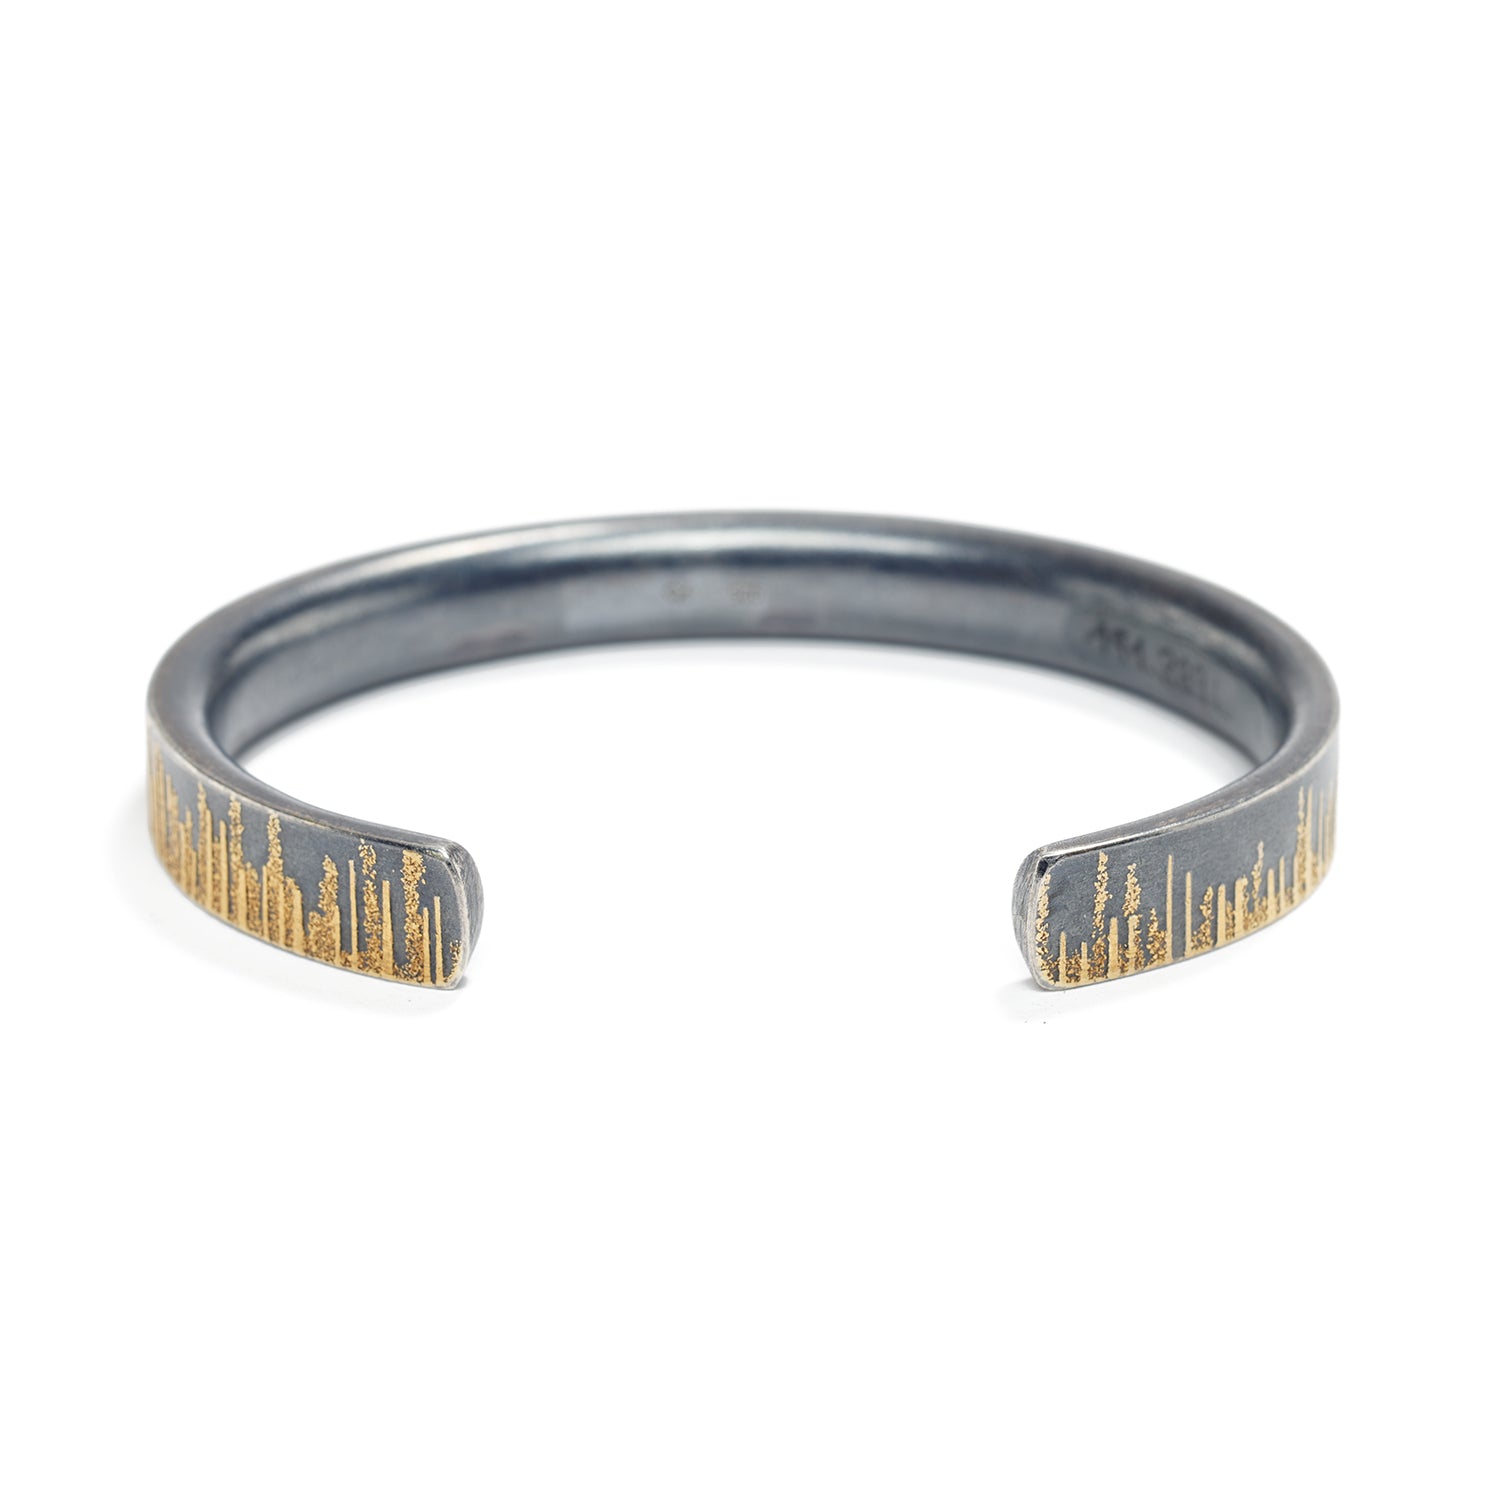 Lined Gold Cuff